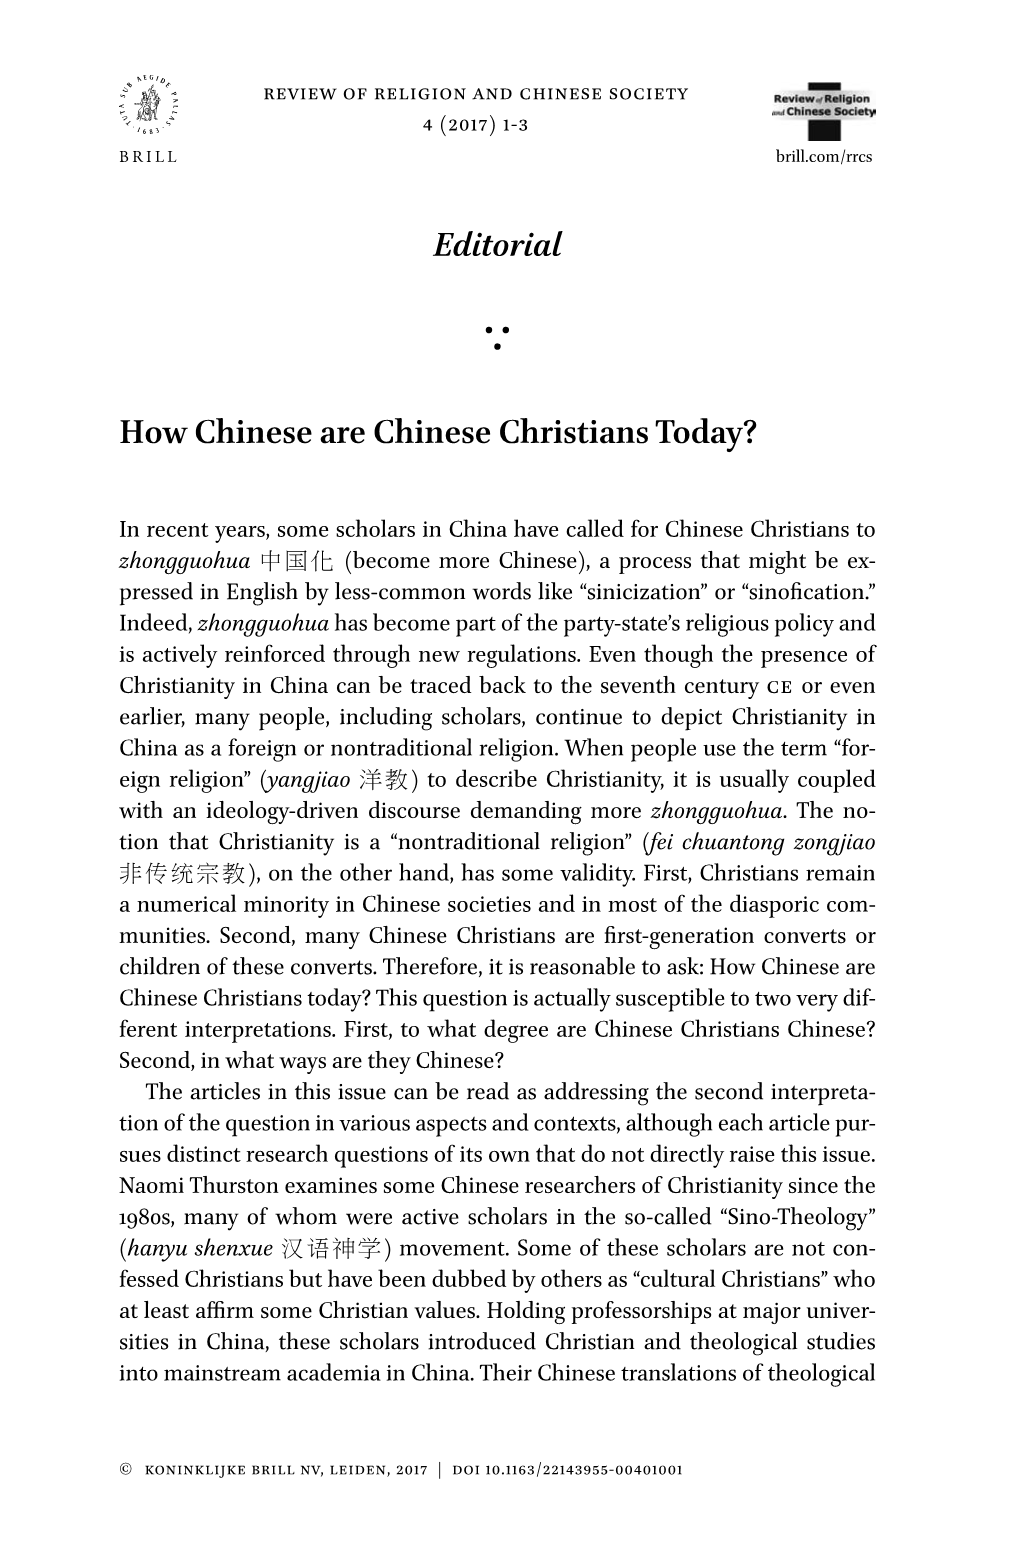 Editorial How Chinese Are Chinese Christians Today?